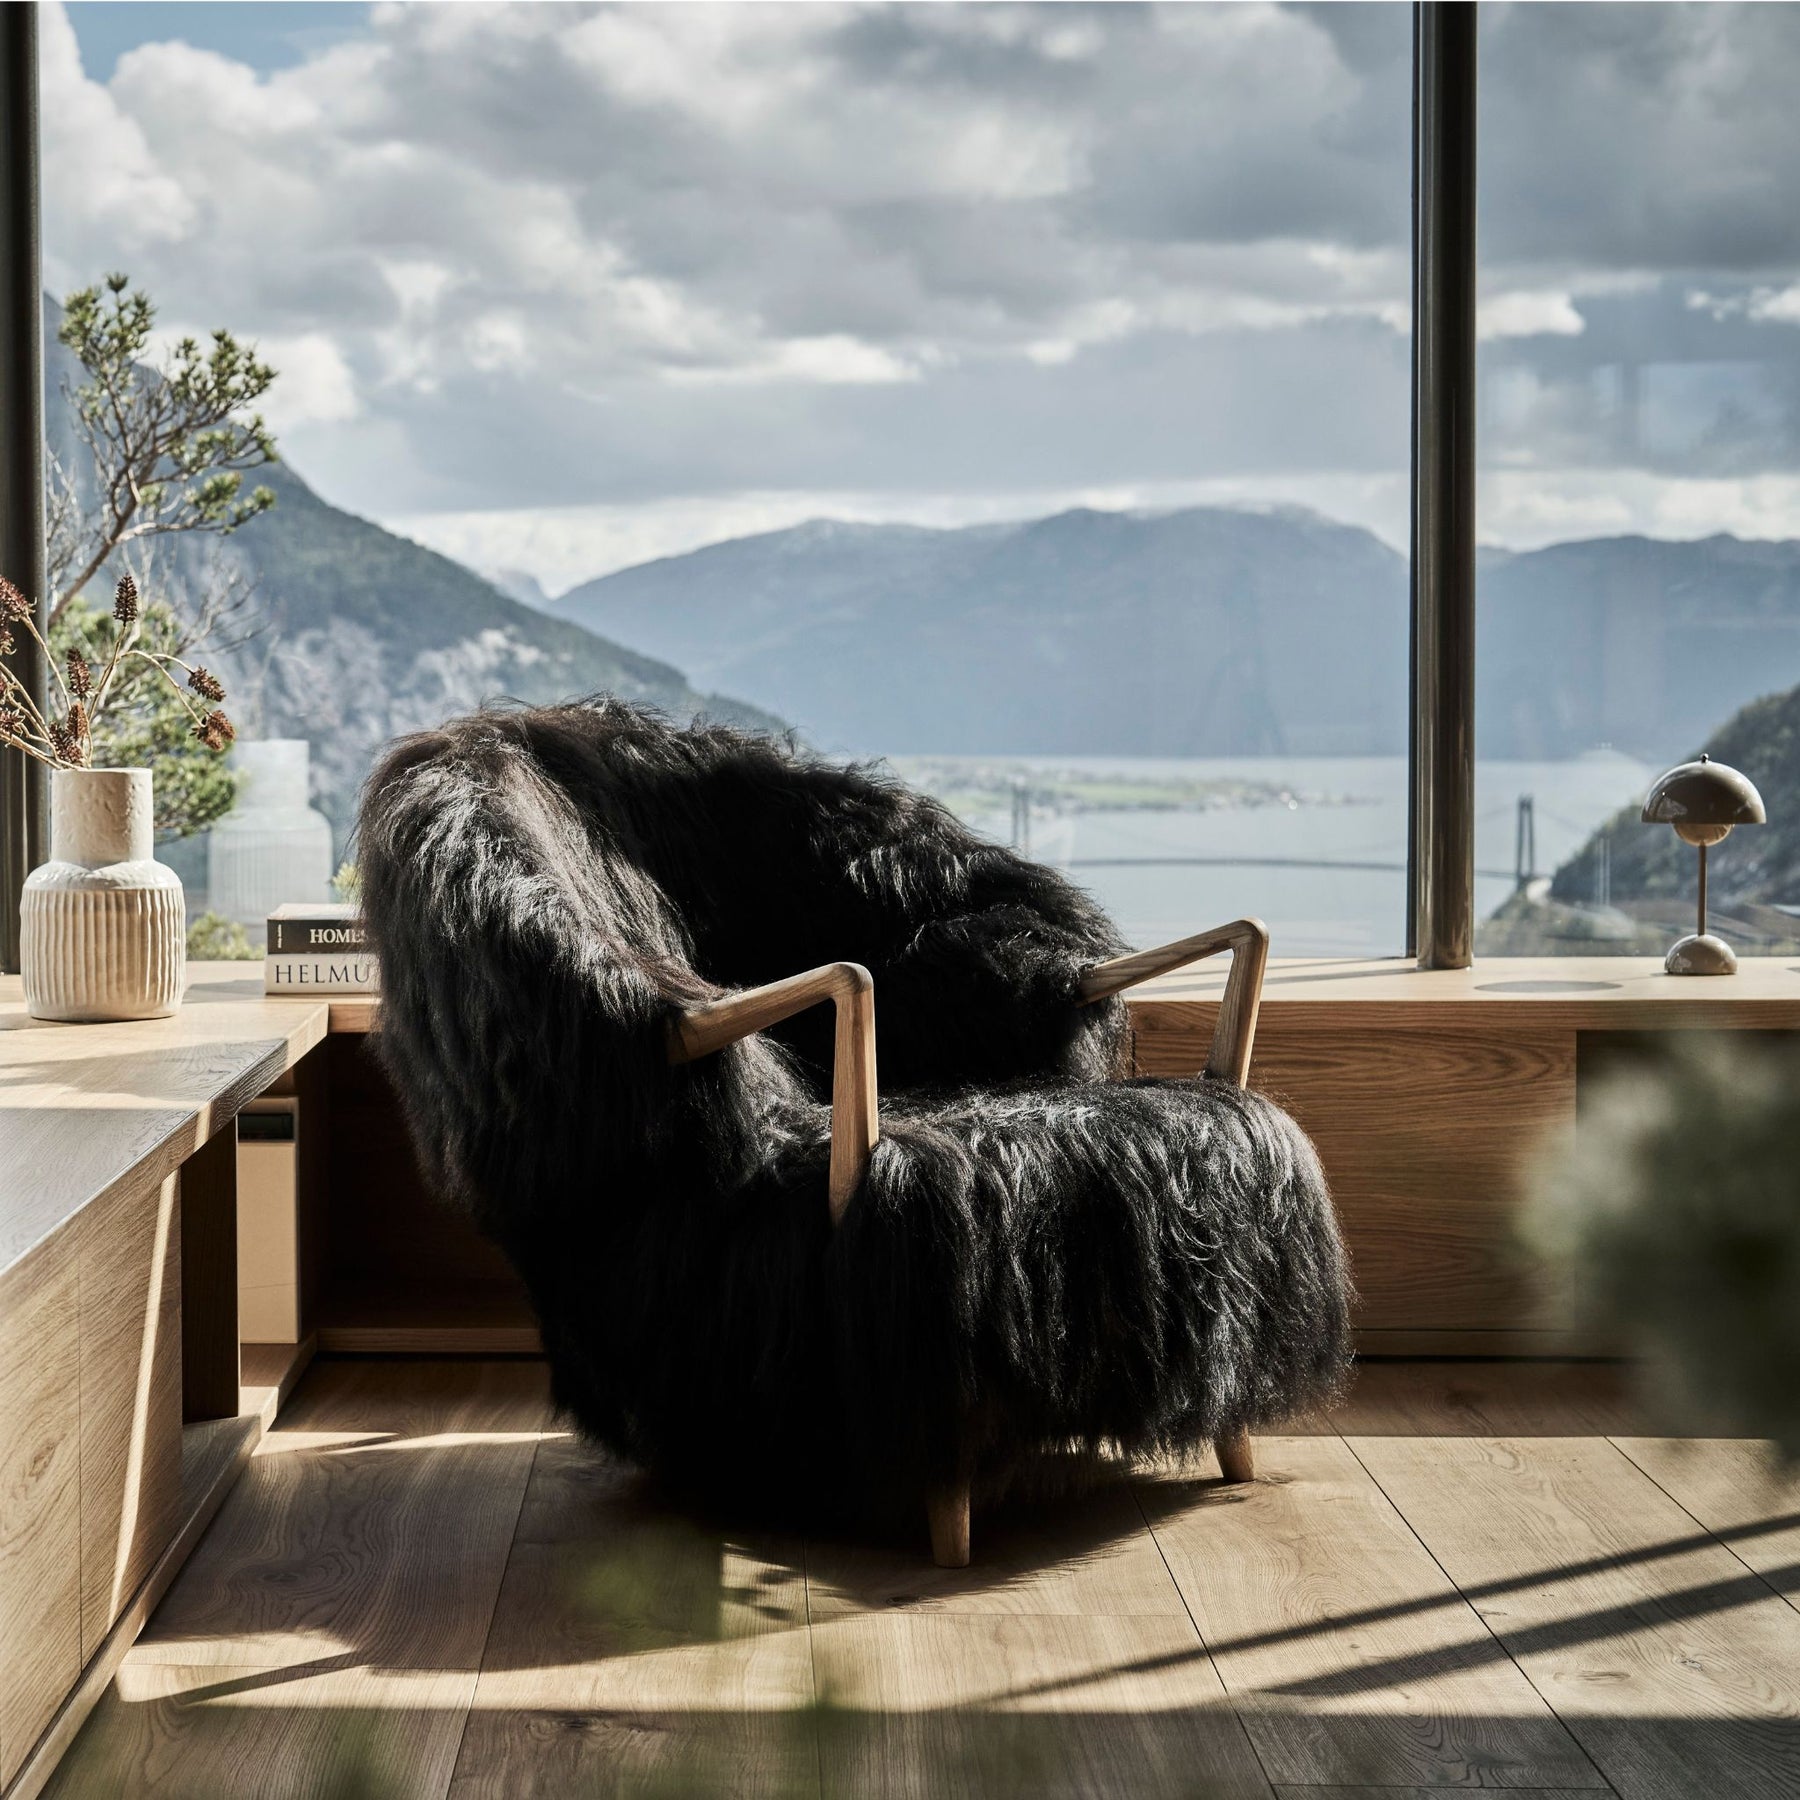 Eikund Fluffy Lounge Chair Black Sheepskin in Norwegian Summer House by Windows with view of Fjord and VP9 Flowerpot Mini Table Lamp